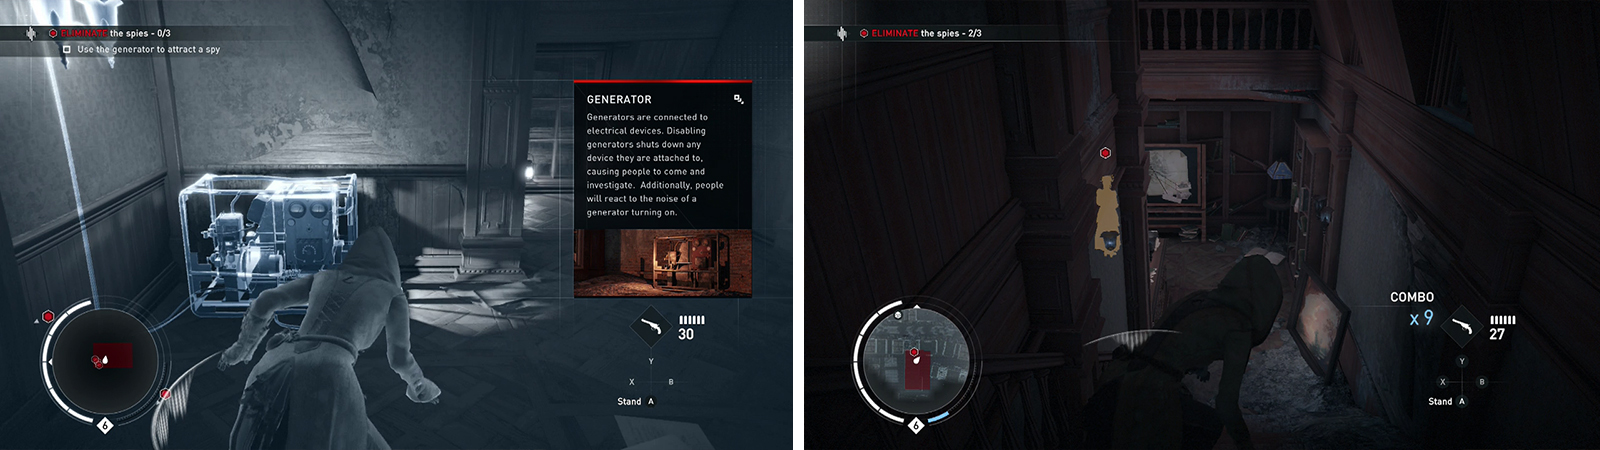 Use the generator to lure enemies into assassinations (left) before moving down to finish off the remaining enemies (right).